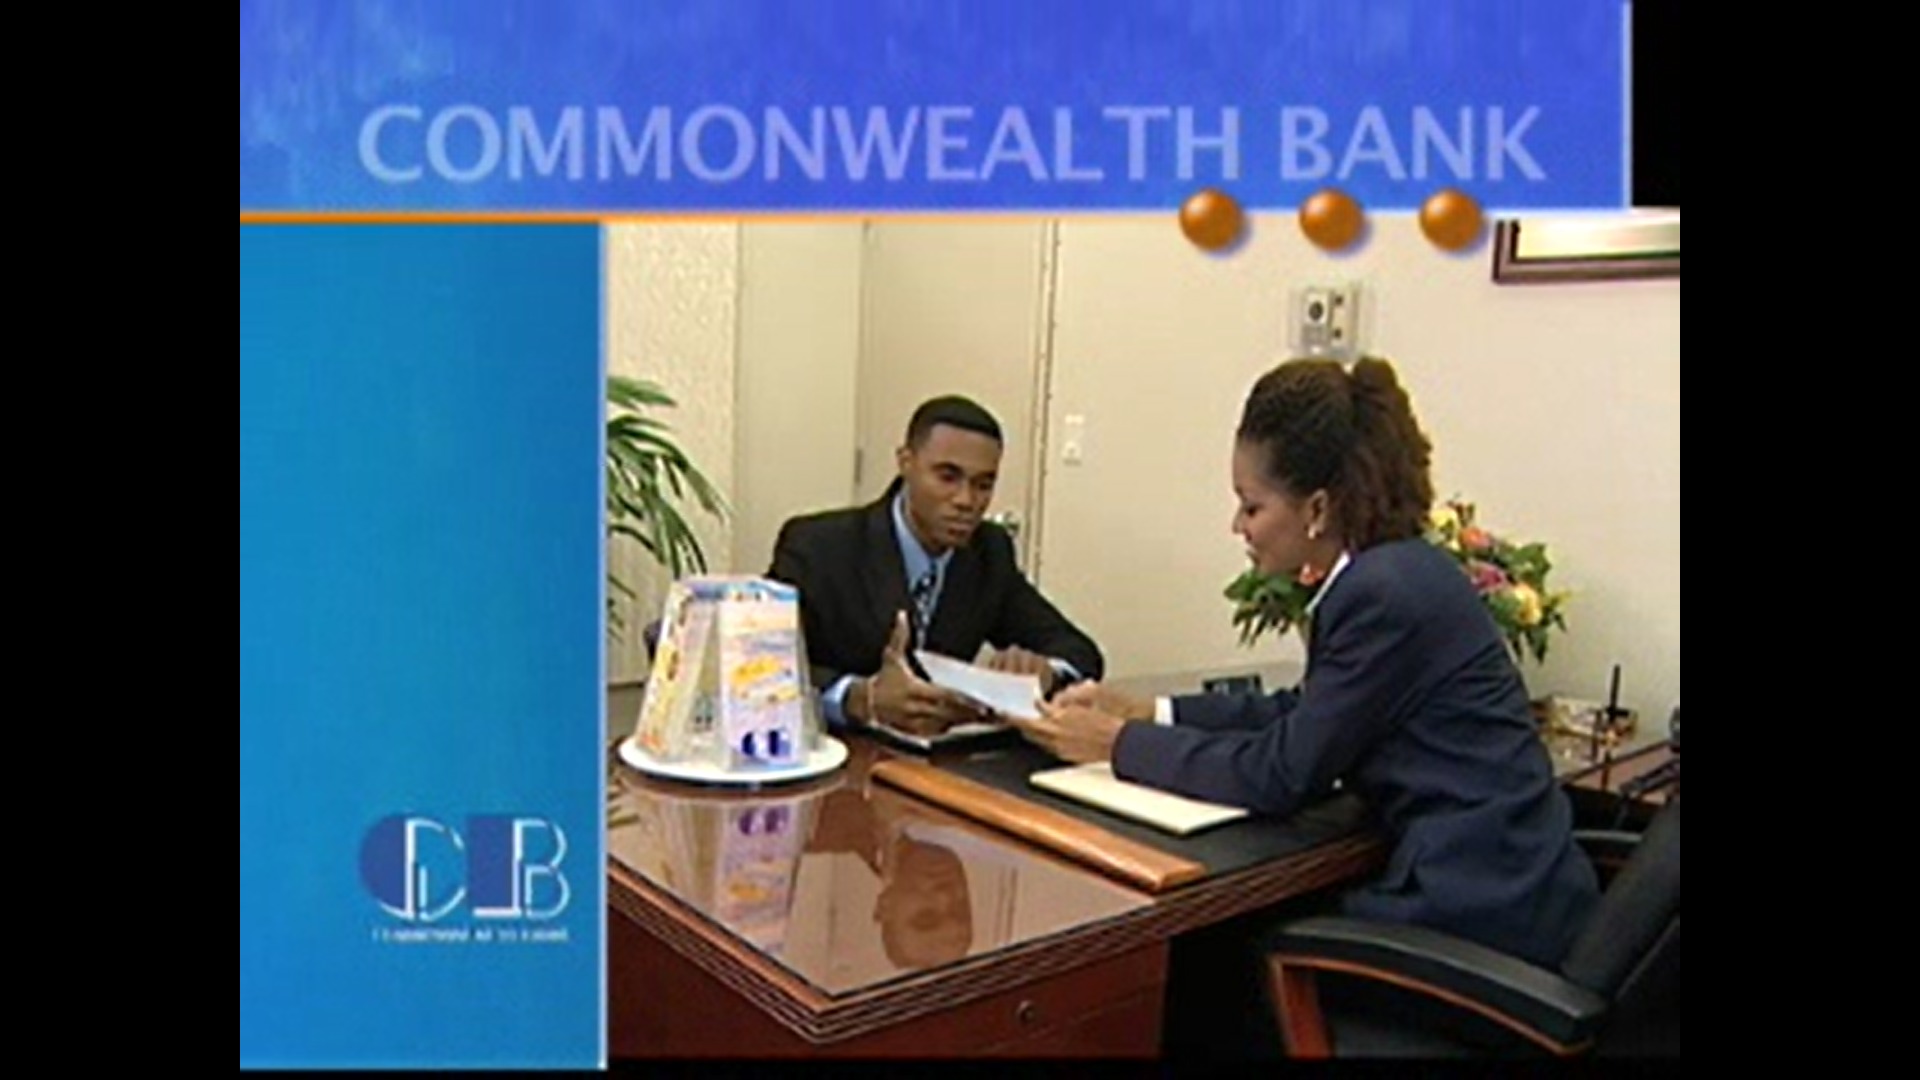 Still image from national TV commercial for Commonwealth Bank.